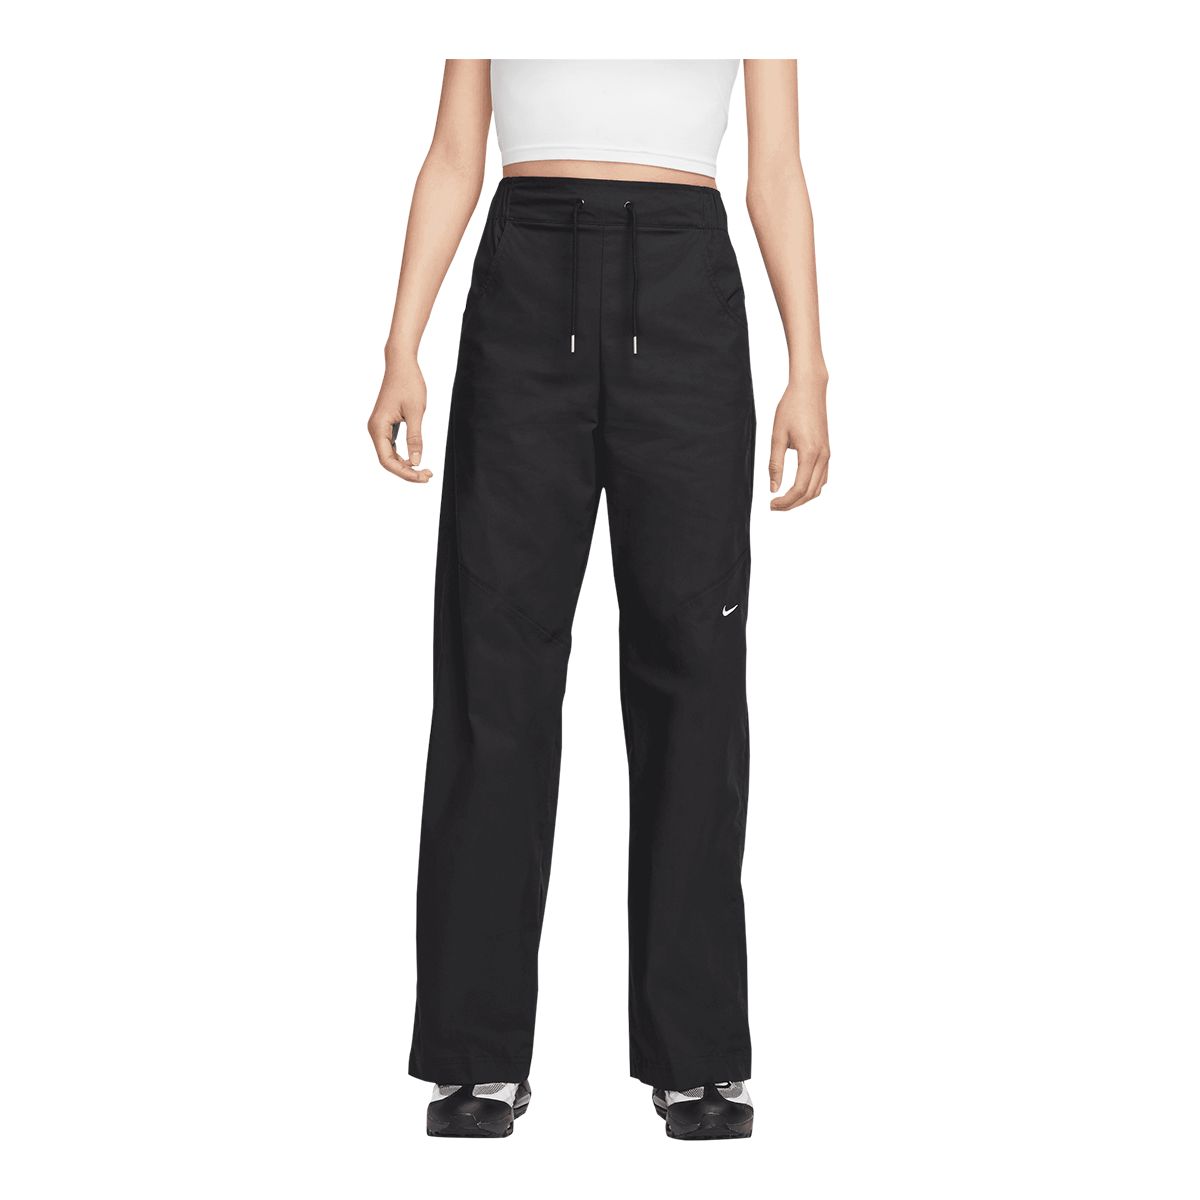 Nike Women's Essential Woven High Rise OH Pants | SportChek